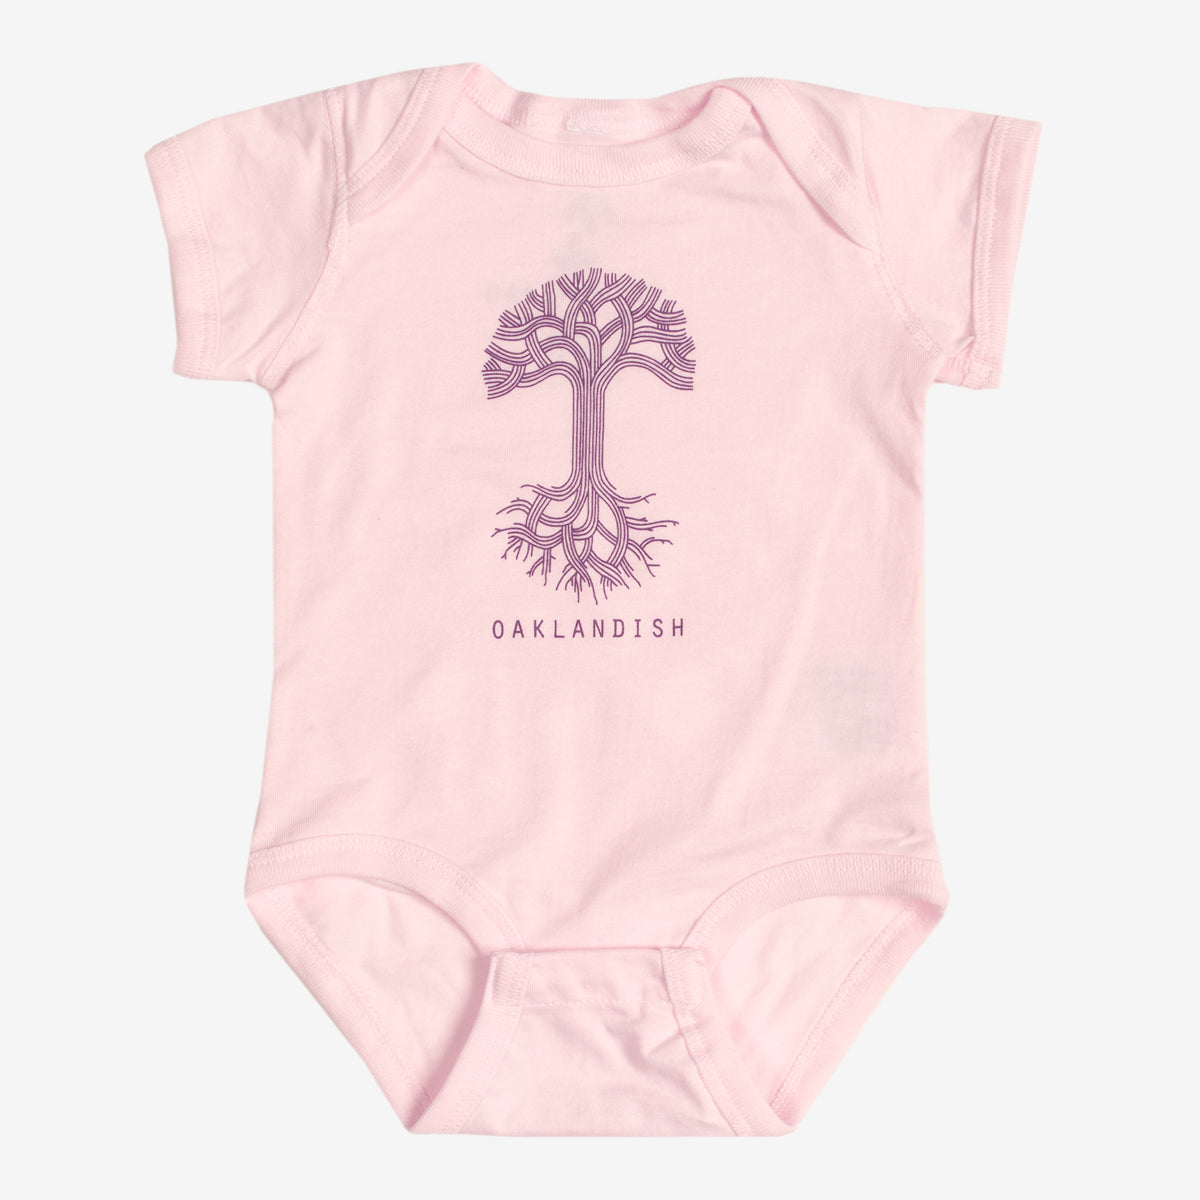 Pink infant one-piece with a purple Oaklandish tree logo and wordmark on the chest.